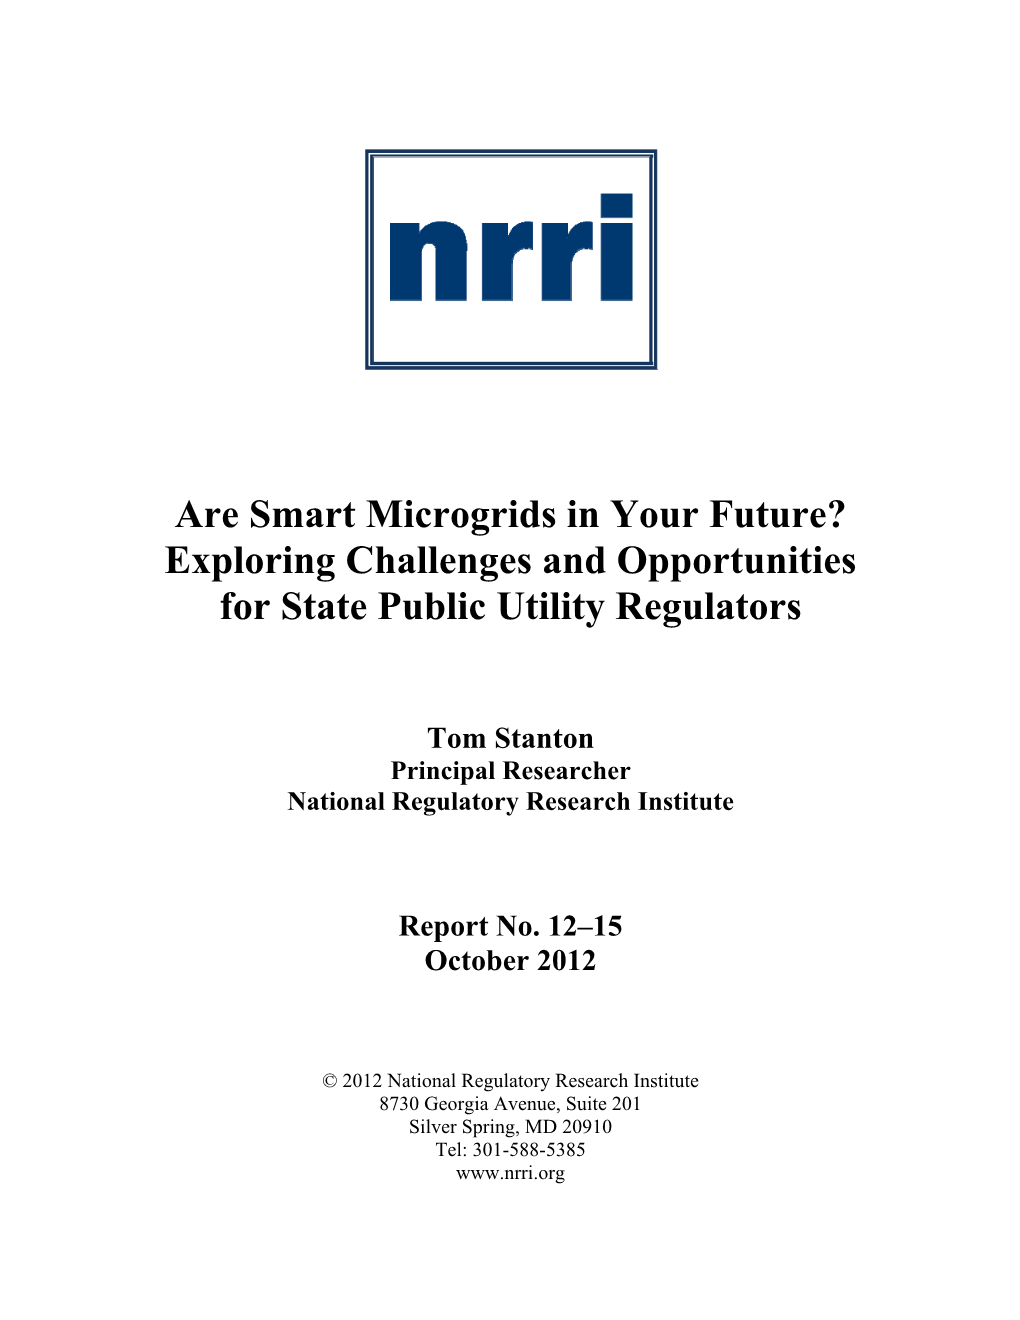 Are Smart Microgrids in Your Future? Exploring Challenges and Opportunities for State Public Utility Regulators